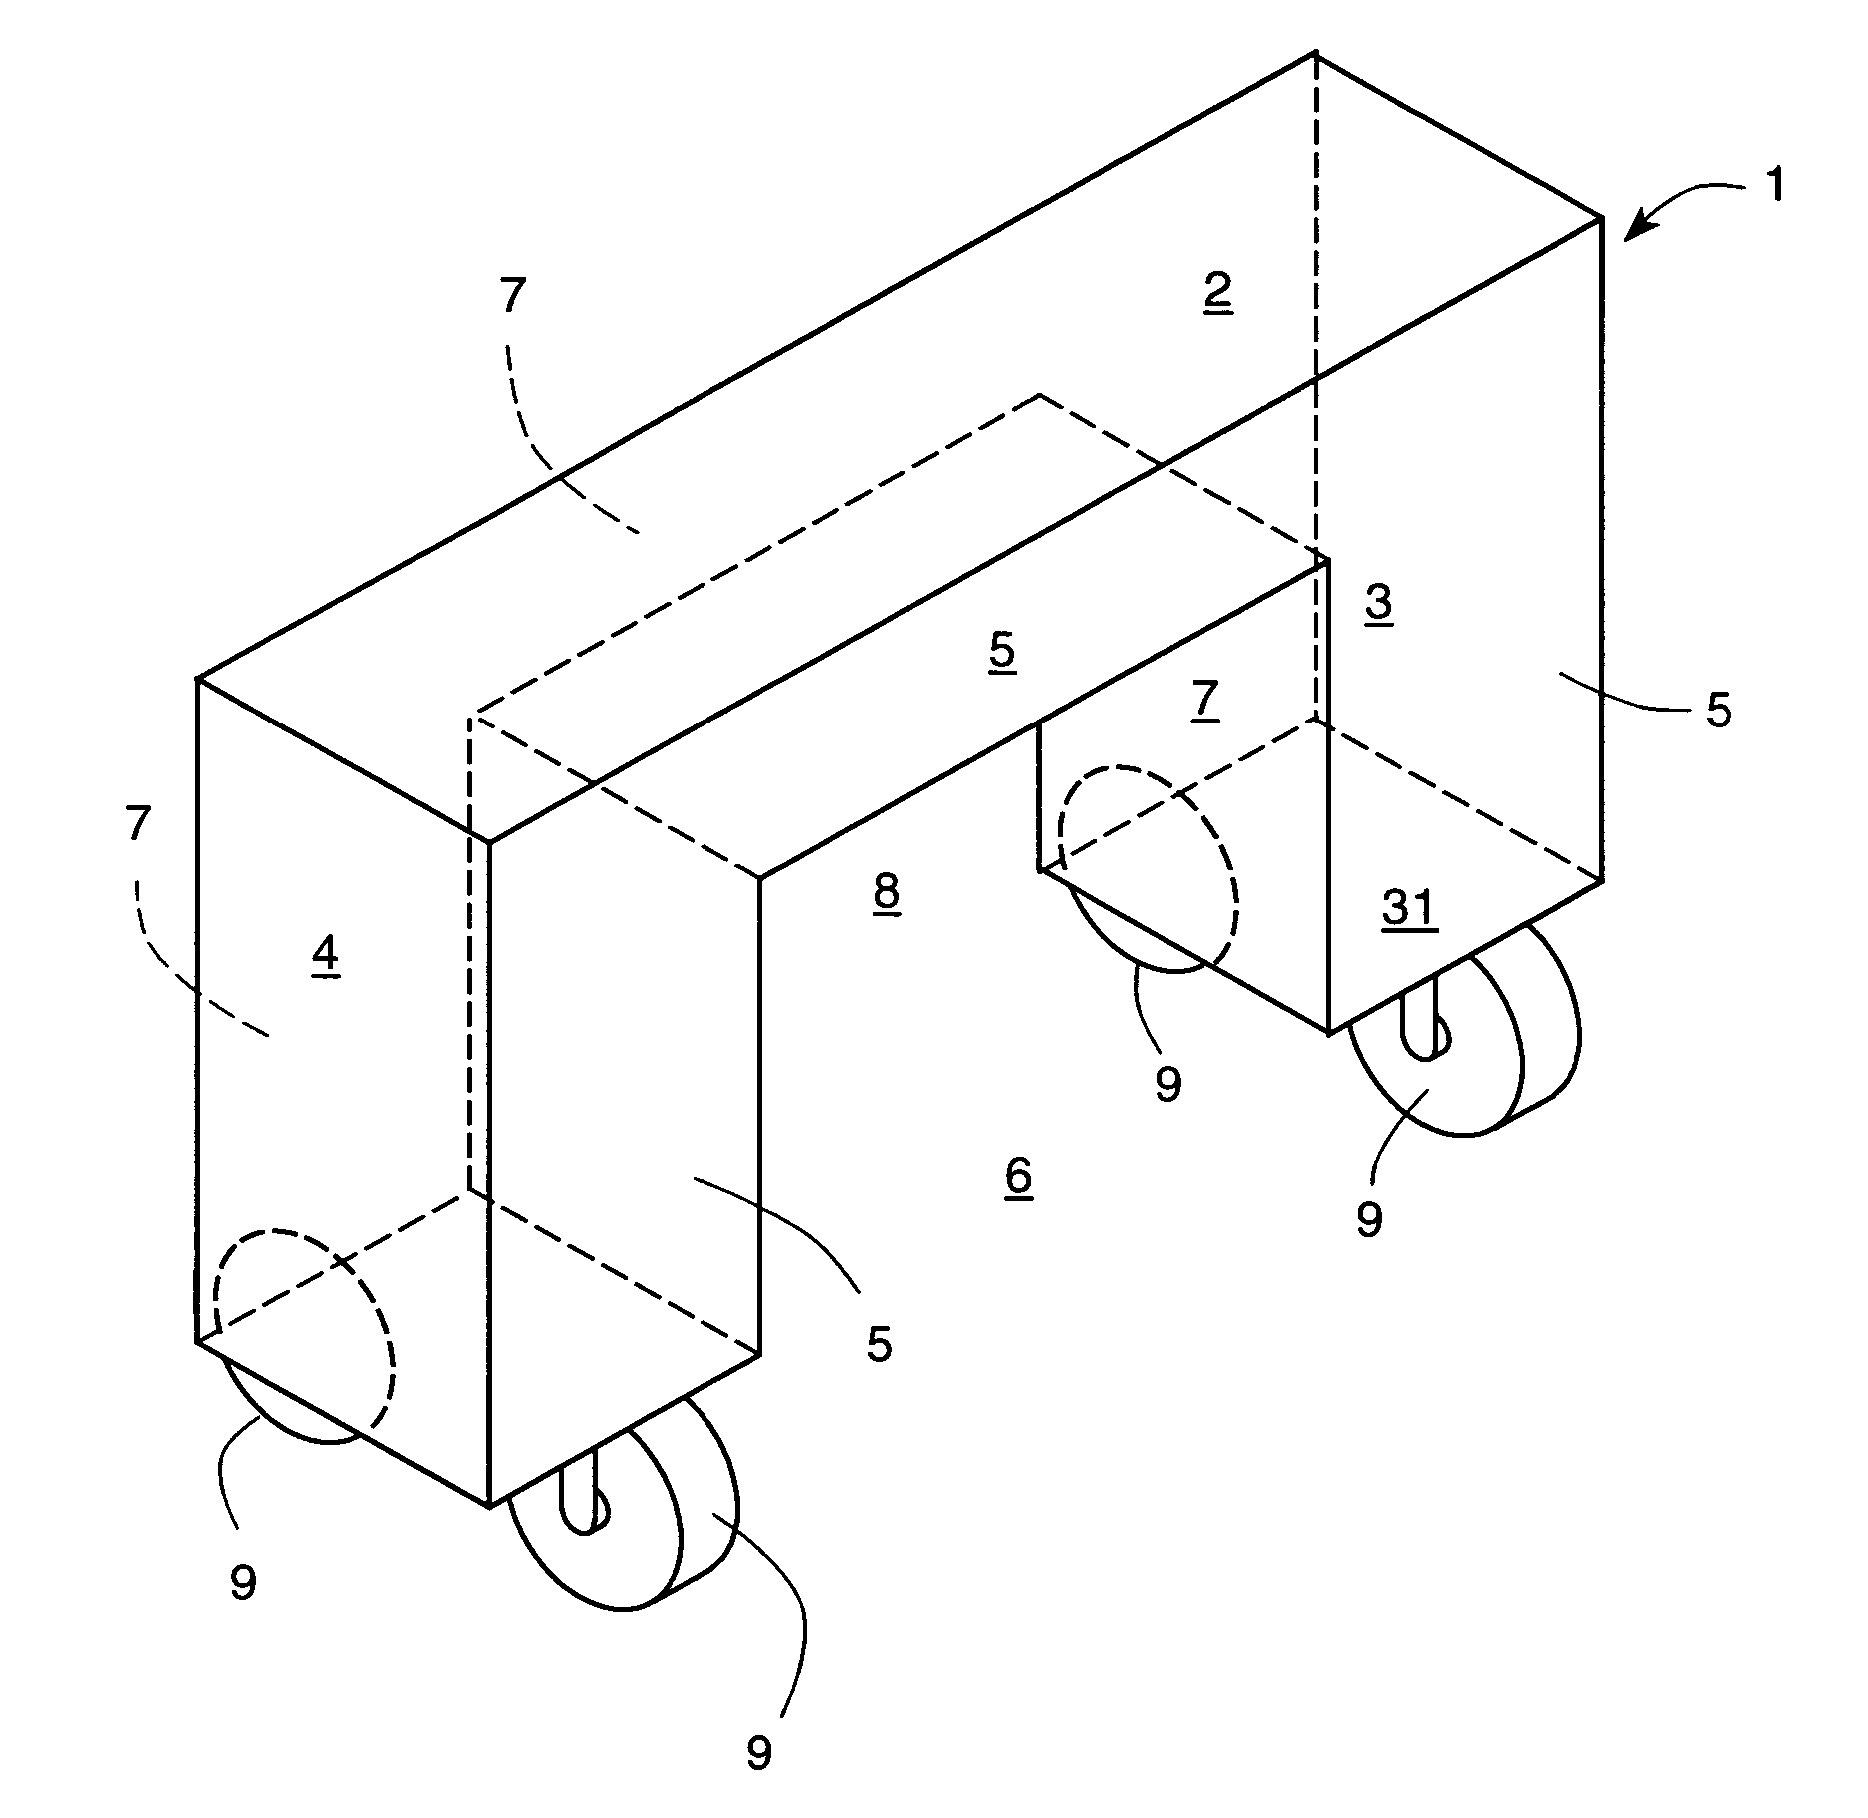 System and method for treating live cargo such as poultry with gas